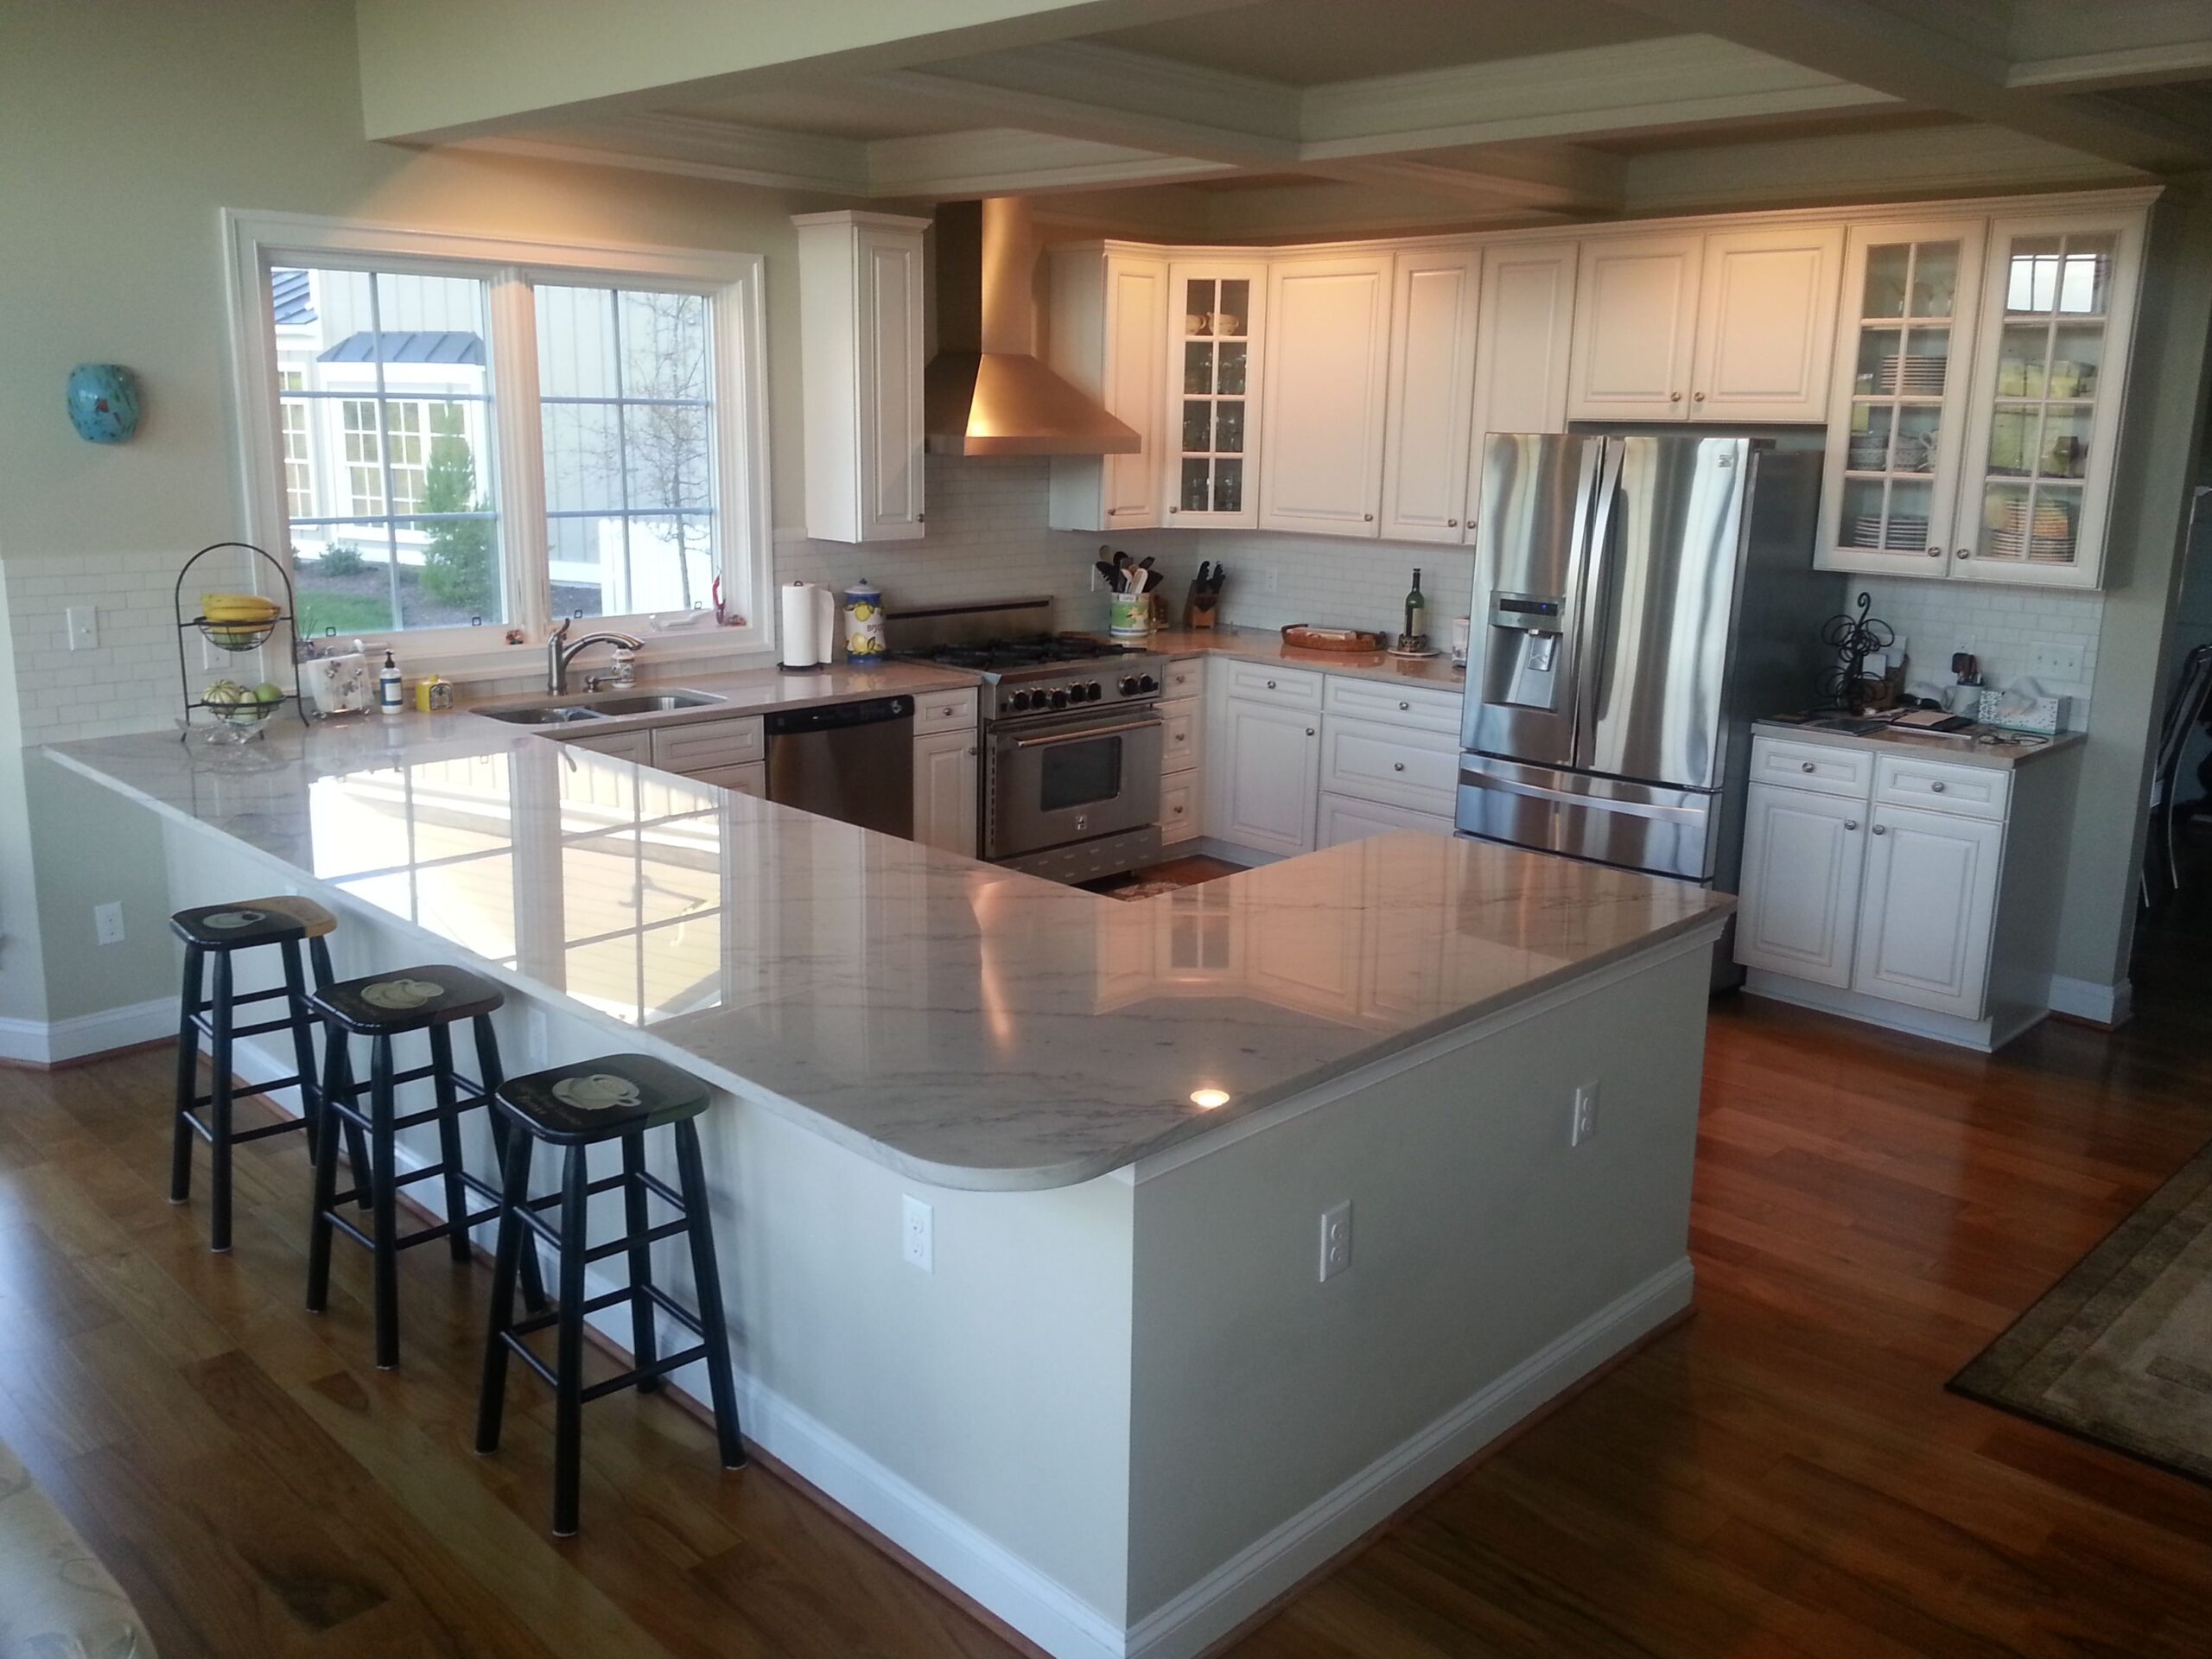 Balancing Style & Functionality for Everyday Louisville Kitchen Issues